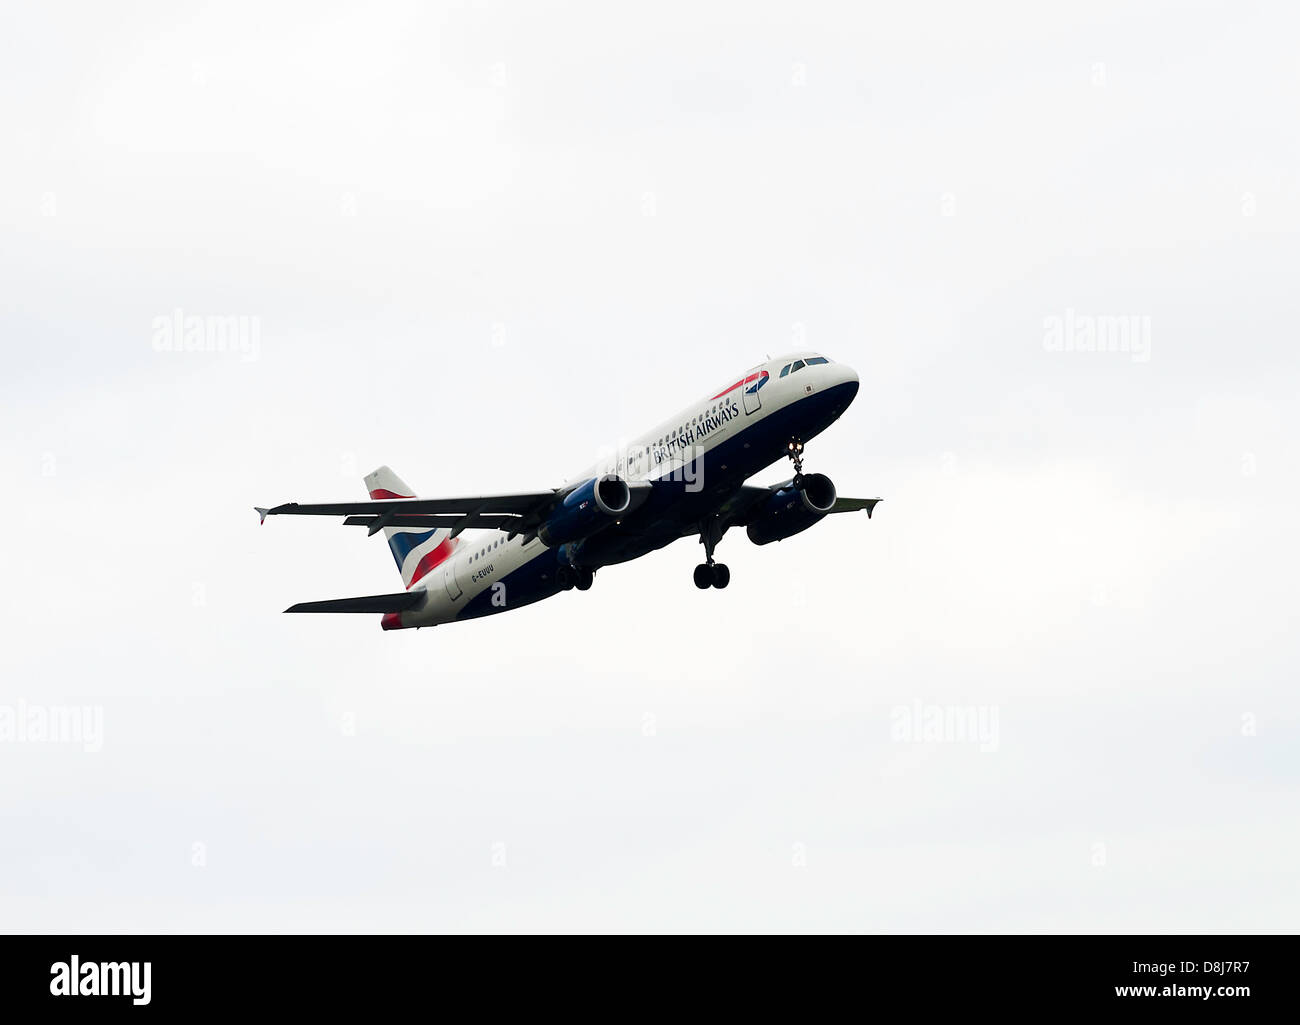 British Airways Airbus A320 Airliner Taking Off on Departure at Manchester International Airport England United Kingdom UK Stock Photo